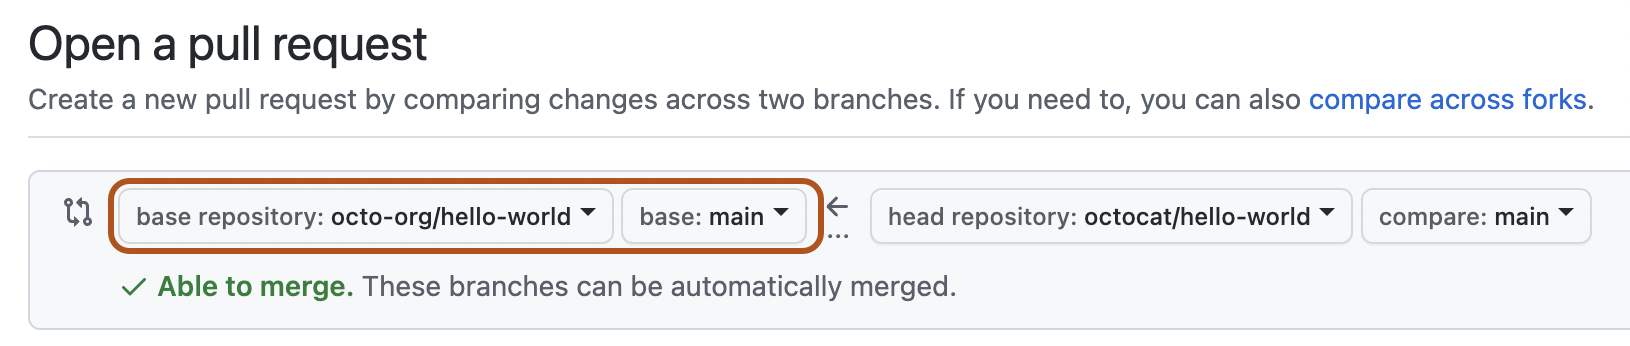 Drop-down menus for choosing the base fork and branch